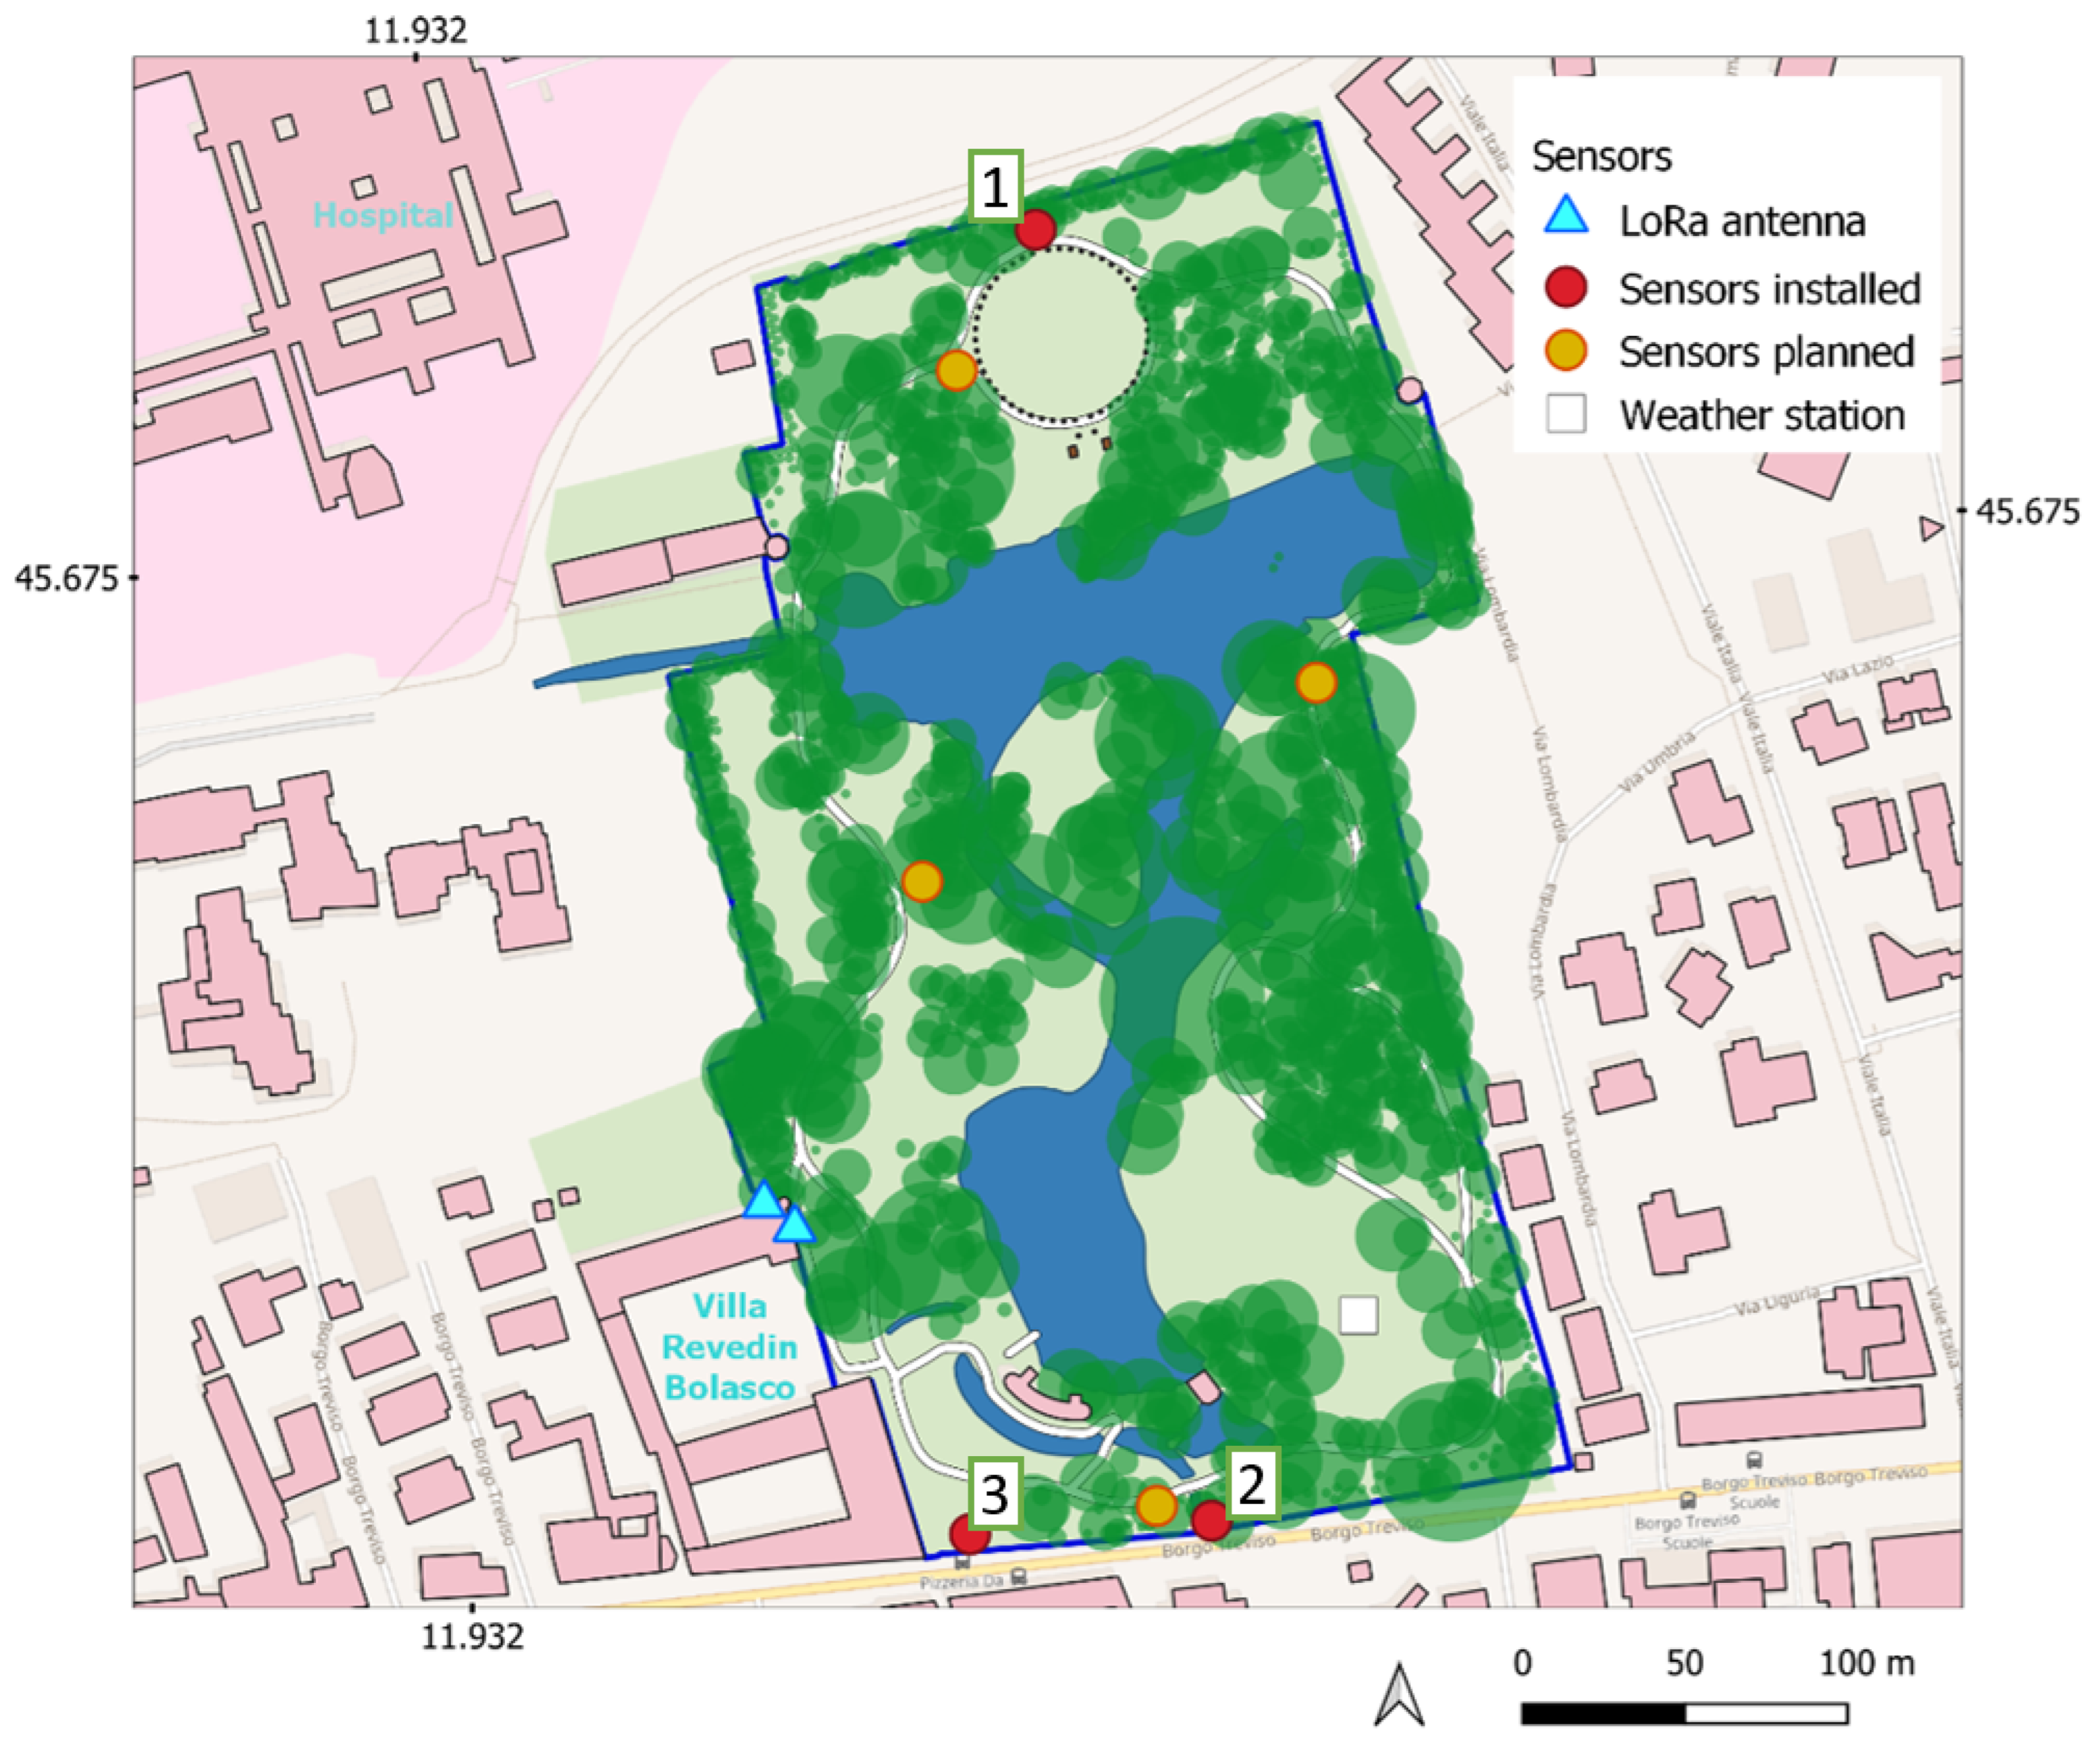 Future Internet | Free Full-Text | Information Technologies for Real-Time  Mapping of Human Well-Being Indicators in an Urban Historical Garden | HTML